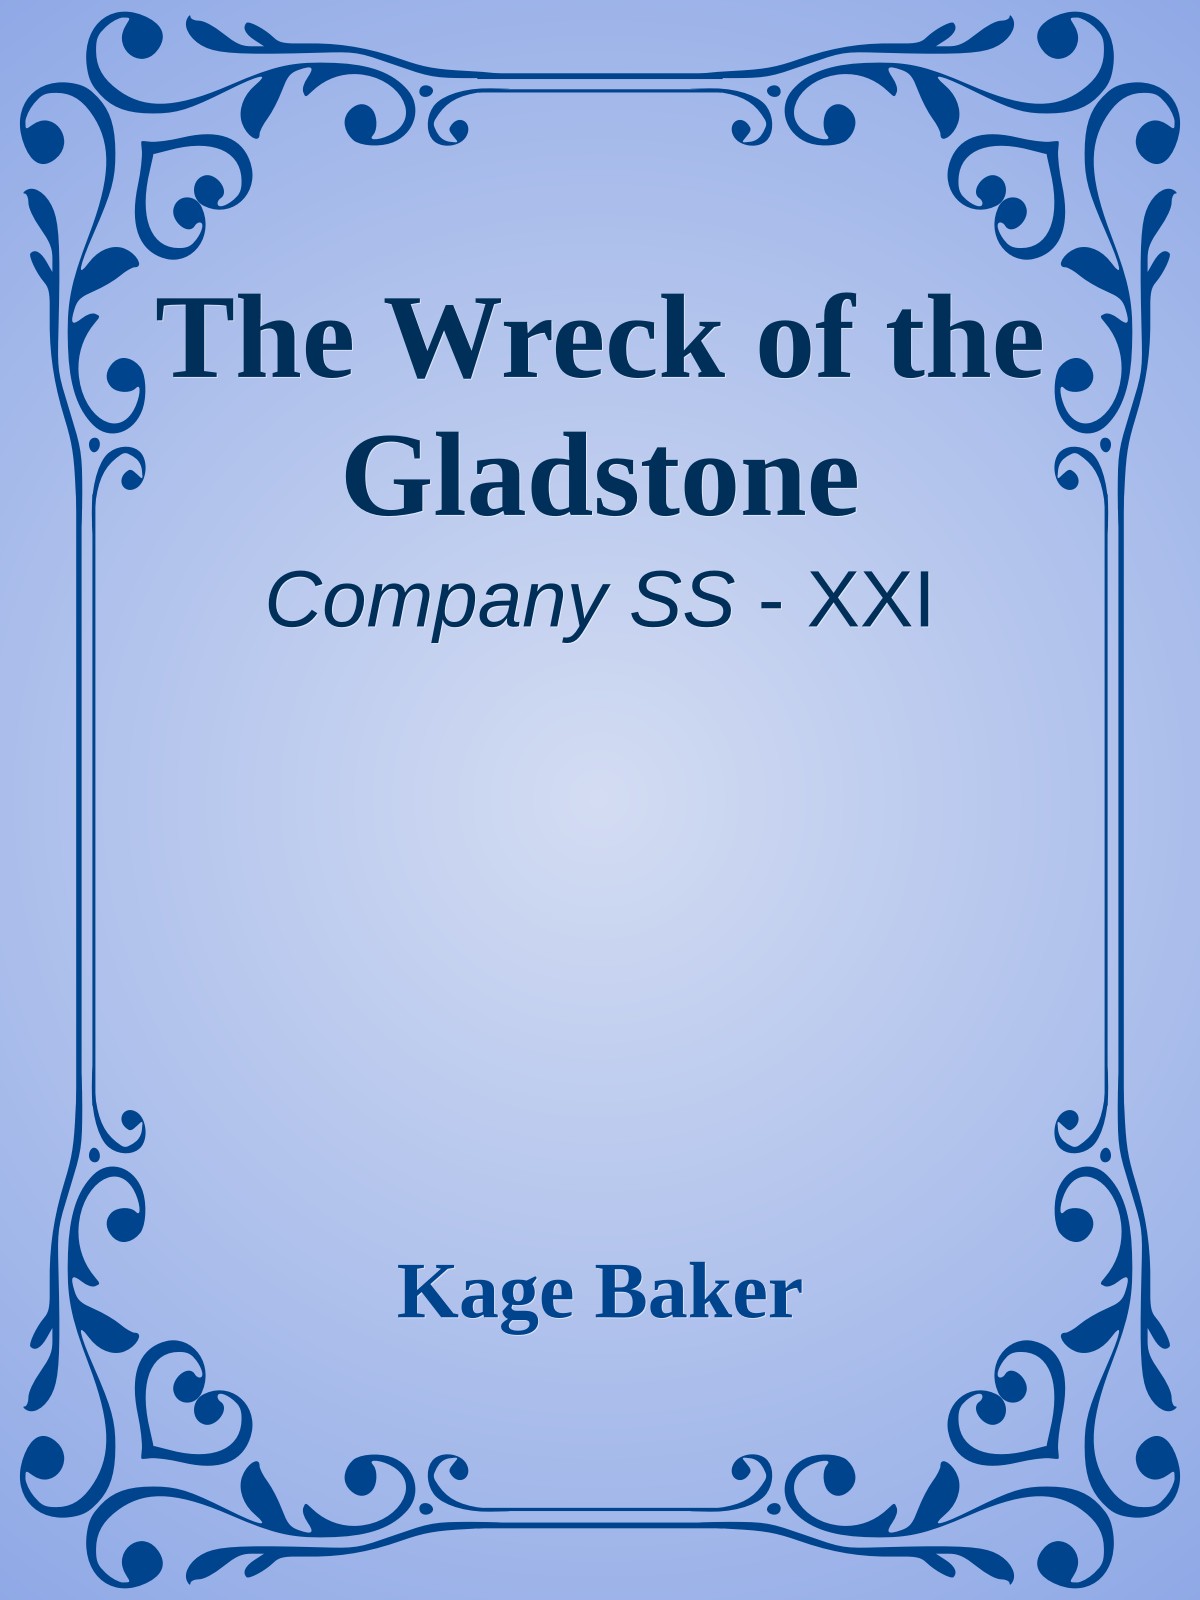 The Wreck of the Gladstone